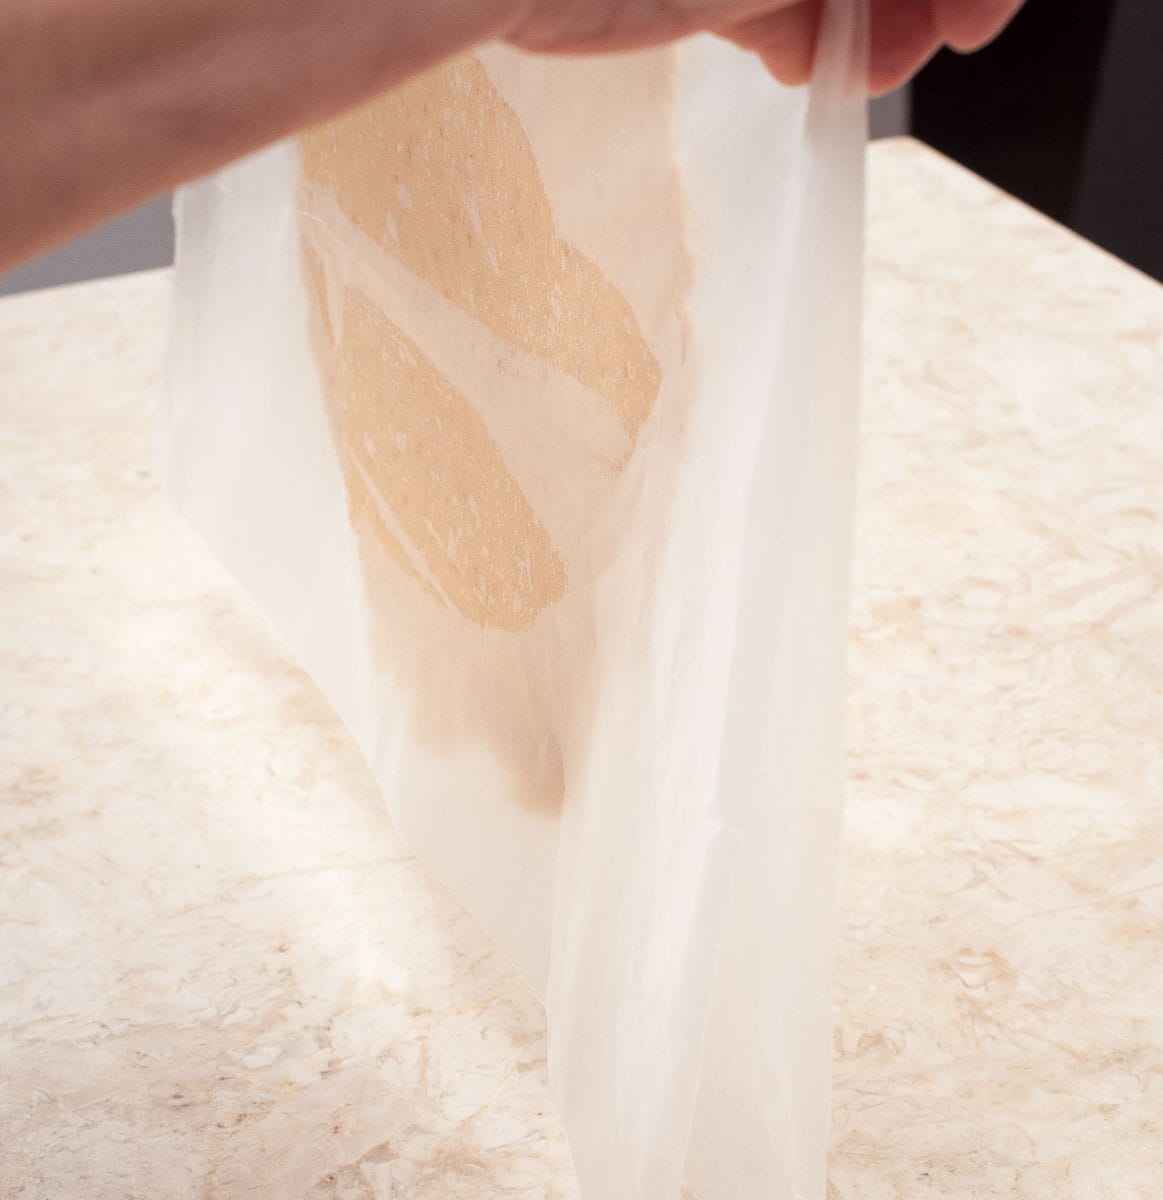 Picking up the wax paper with the dough between the paper.